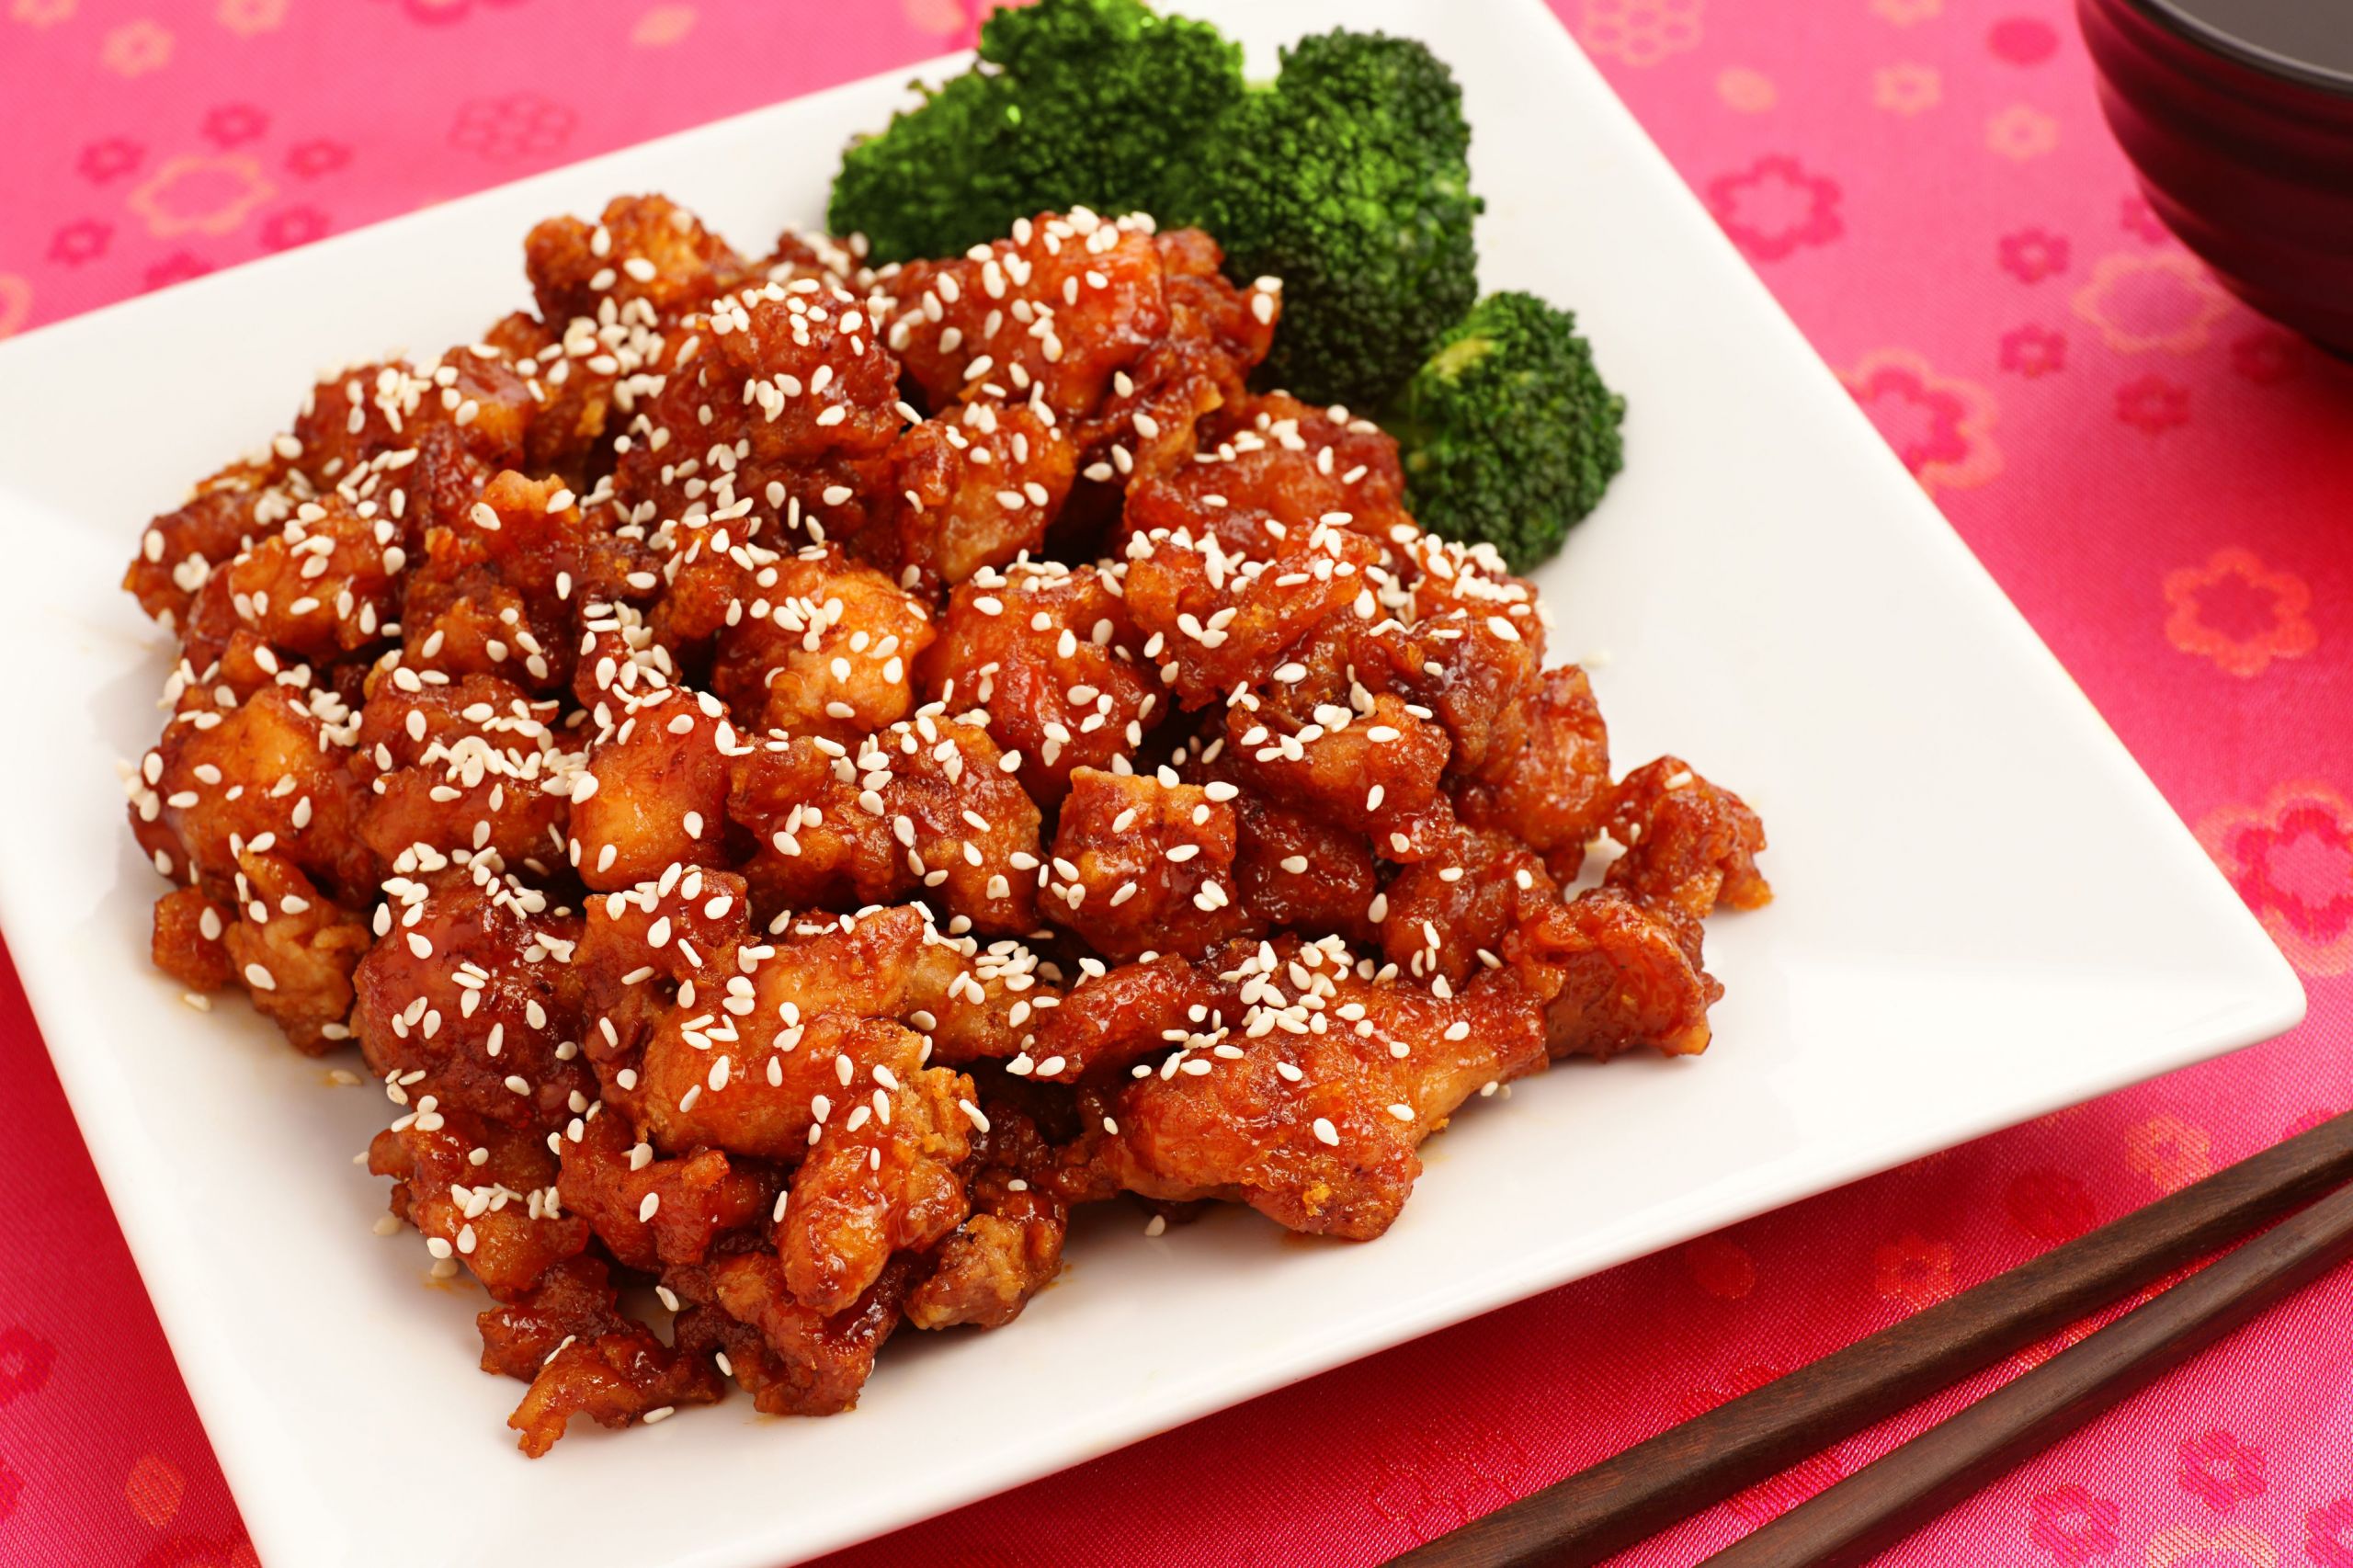 Chinese Restaurants Recipes
 Chinese Sesame Chicken With Garlic and Chili Paste